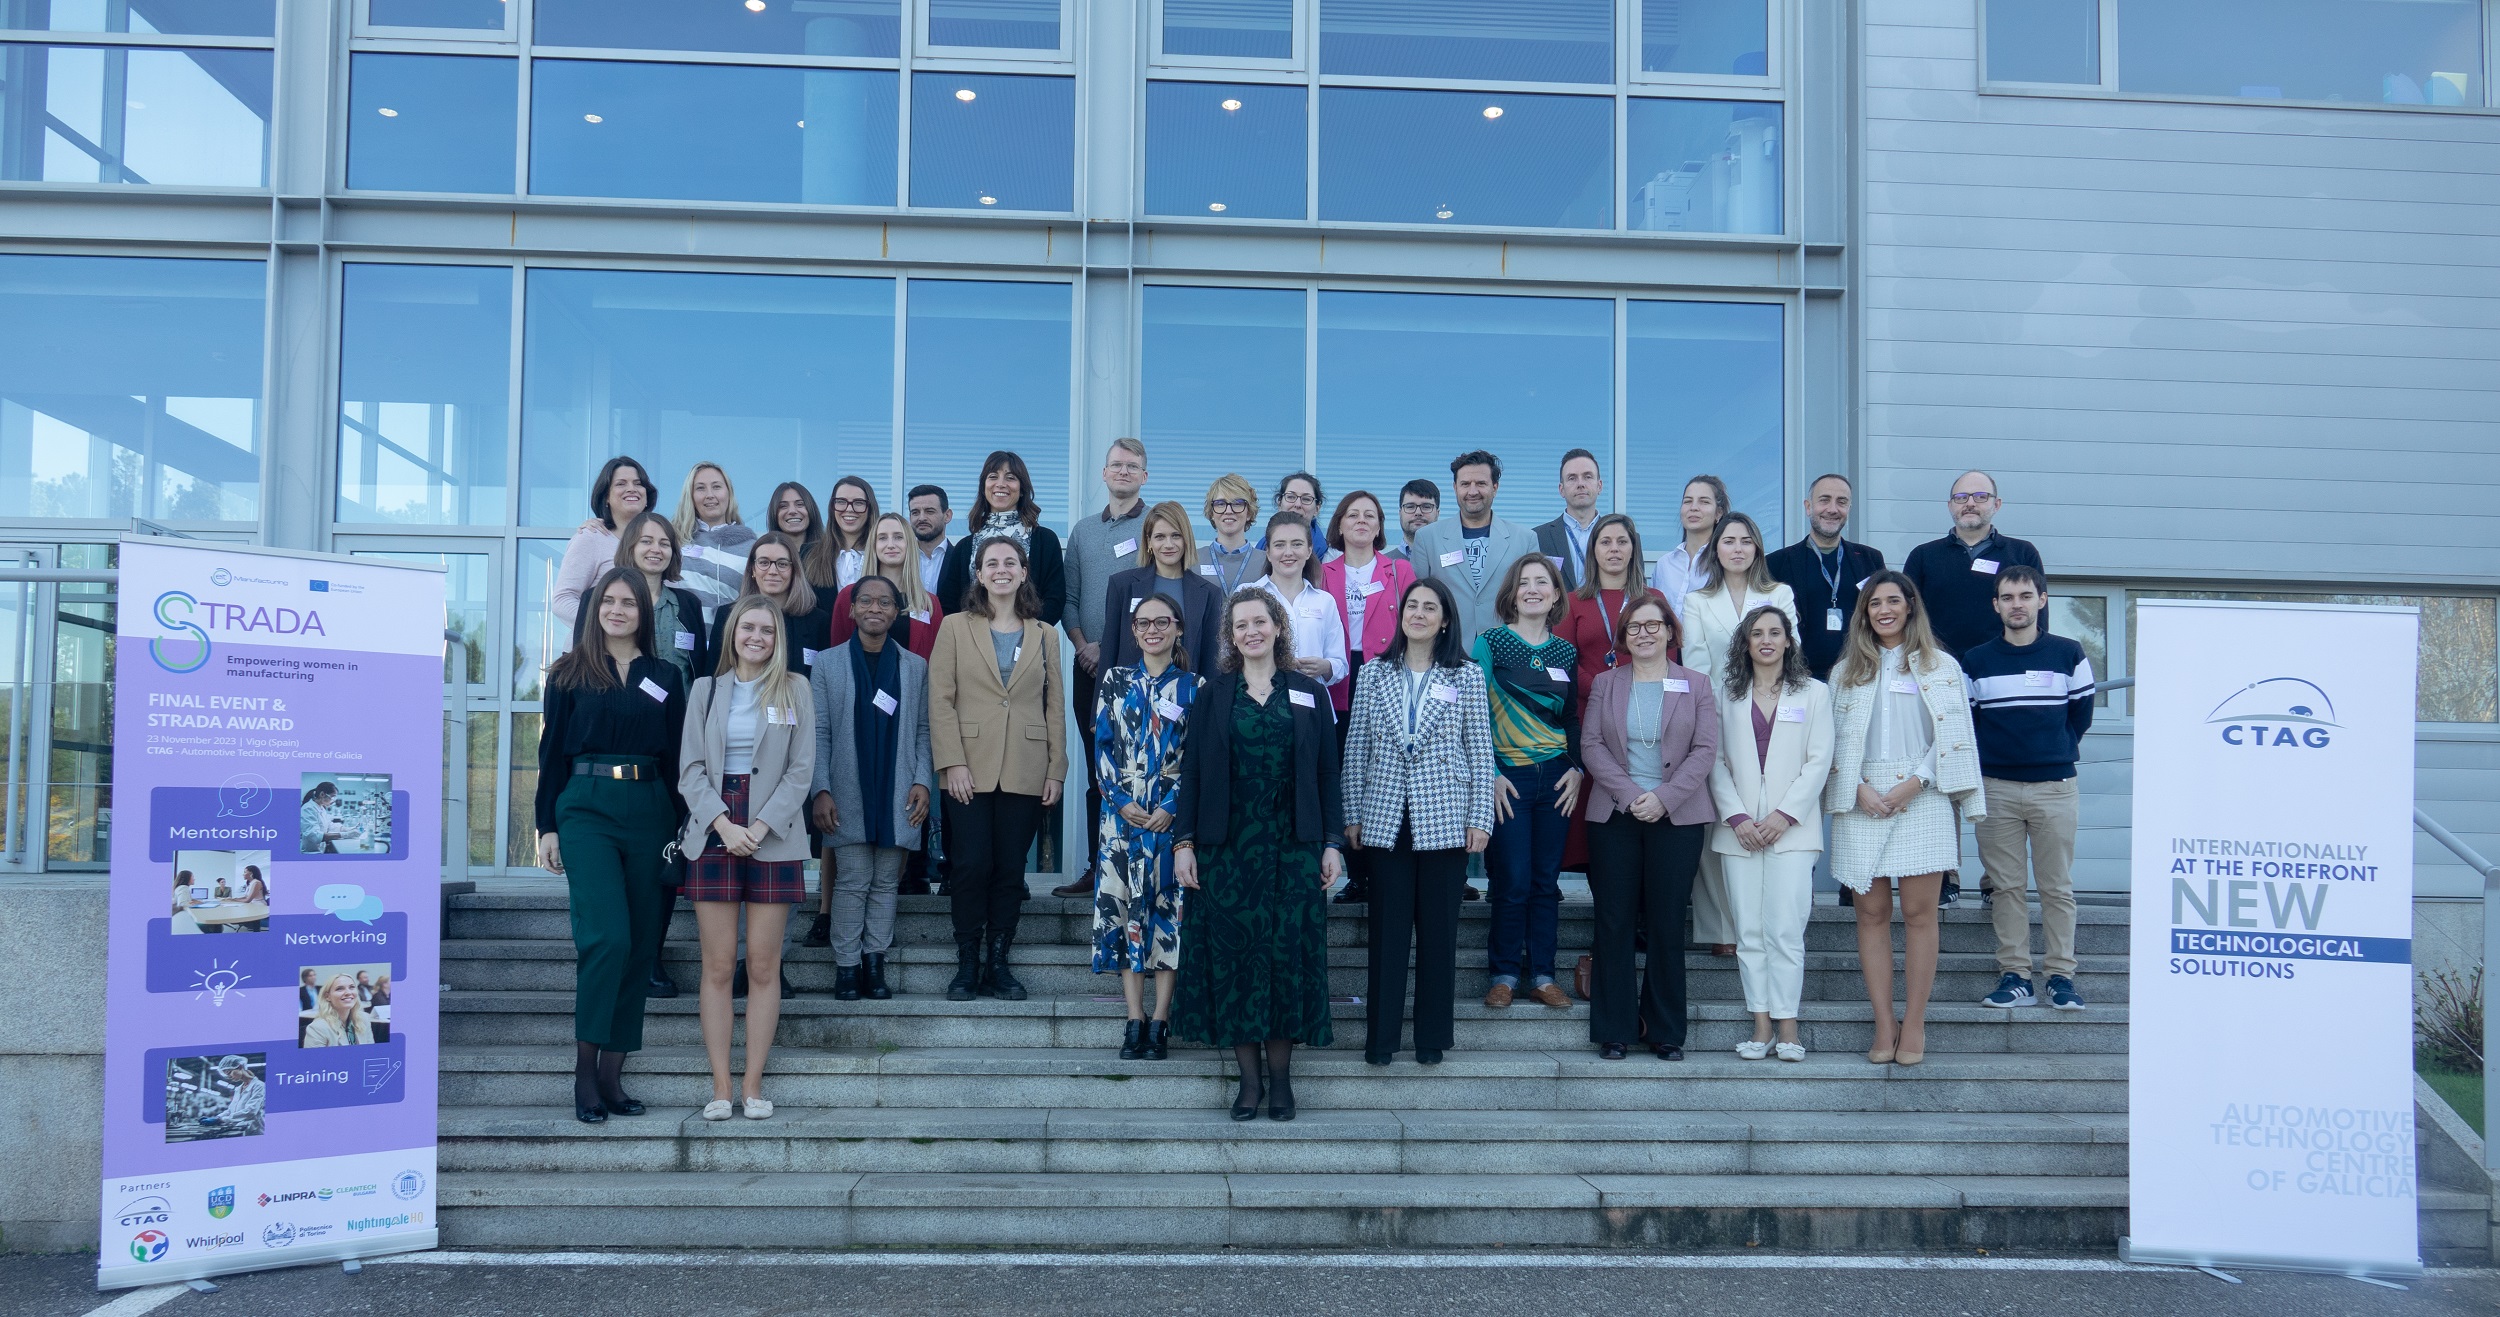 CTAG holds the closing ceremony of the first edition of STRADA – Women in Manufacturing